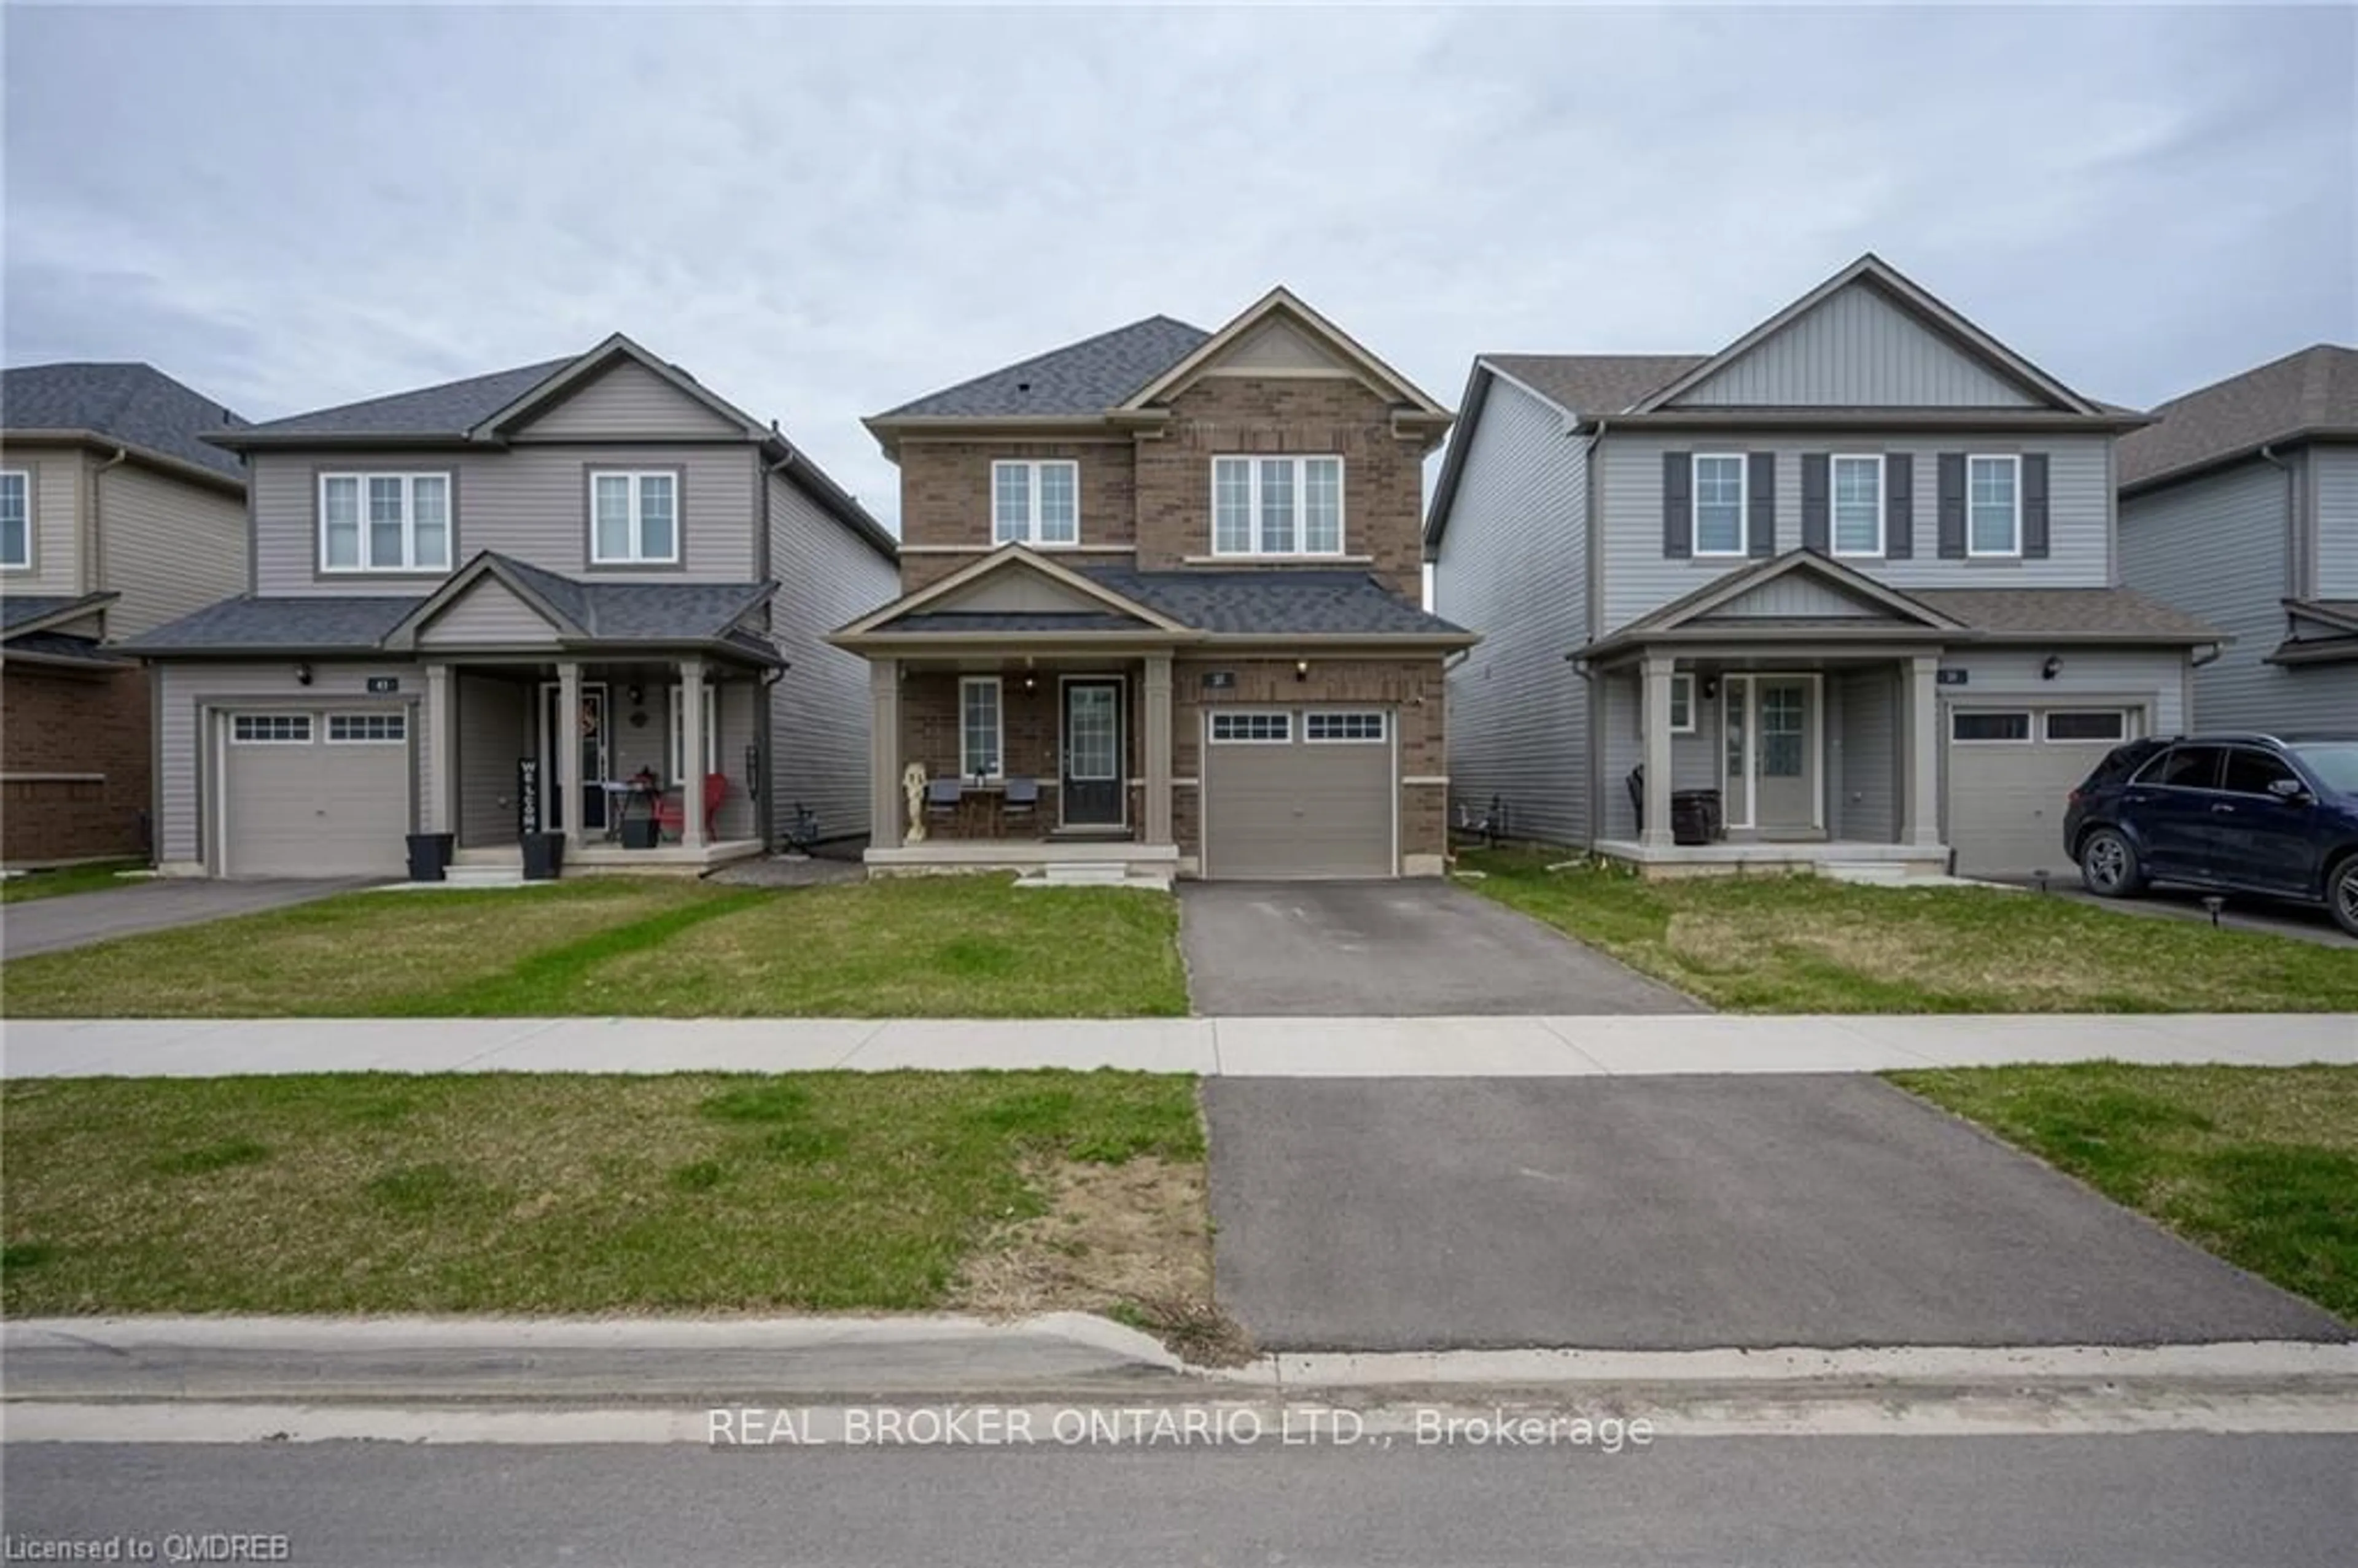 Frontside or backside of a home for 37 Cottonwood Cres, Welland Ontario L3B 0J4